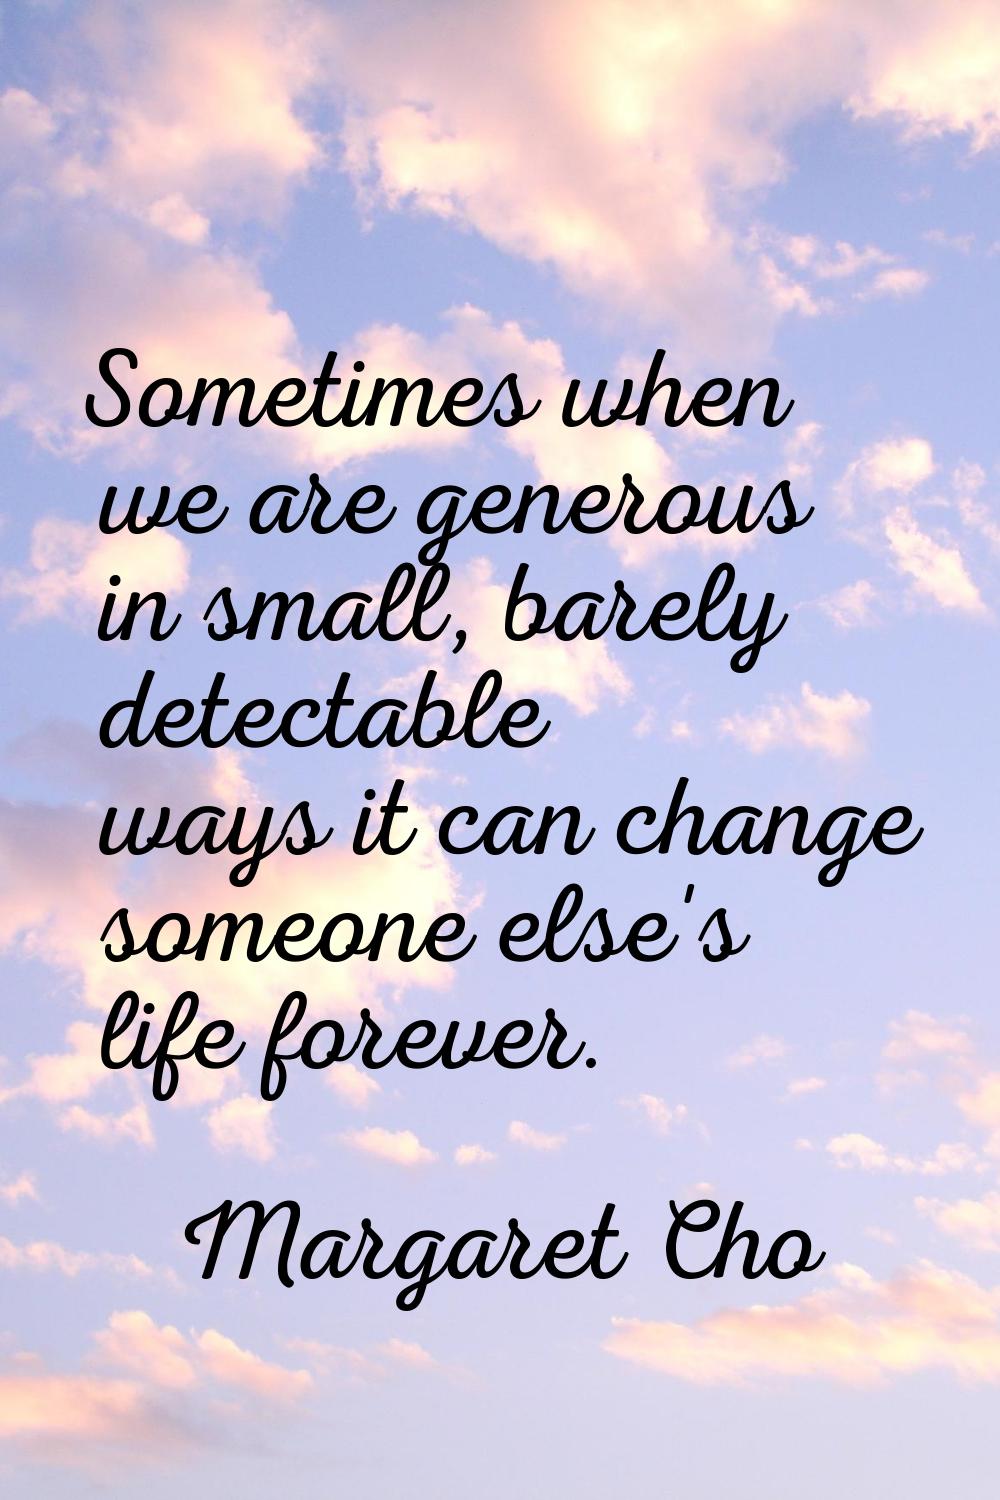 Sometimes when we are generous in small, barely detectable ways it can change someone else's life f